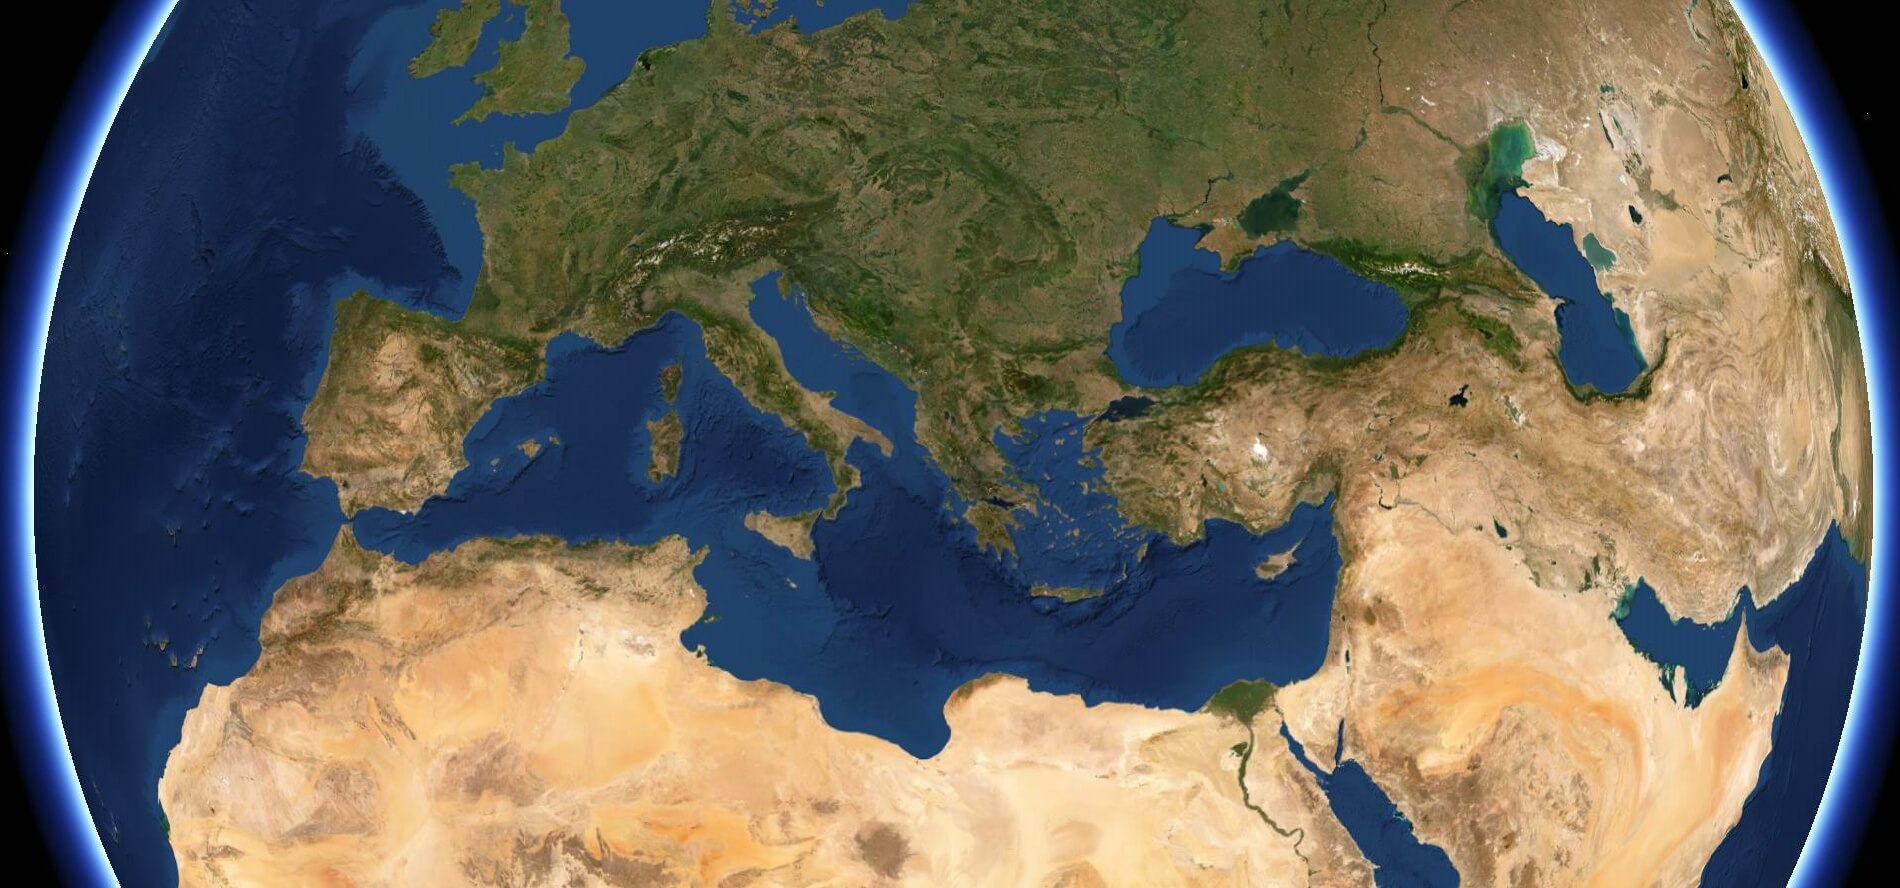 Europe and North Africa 3-D globe view